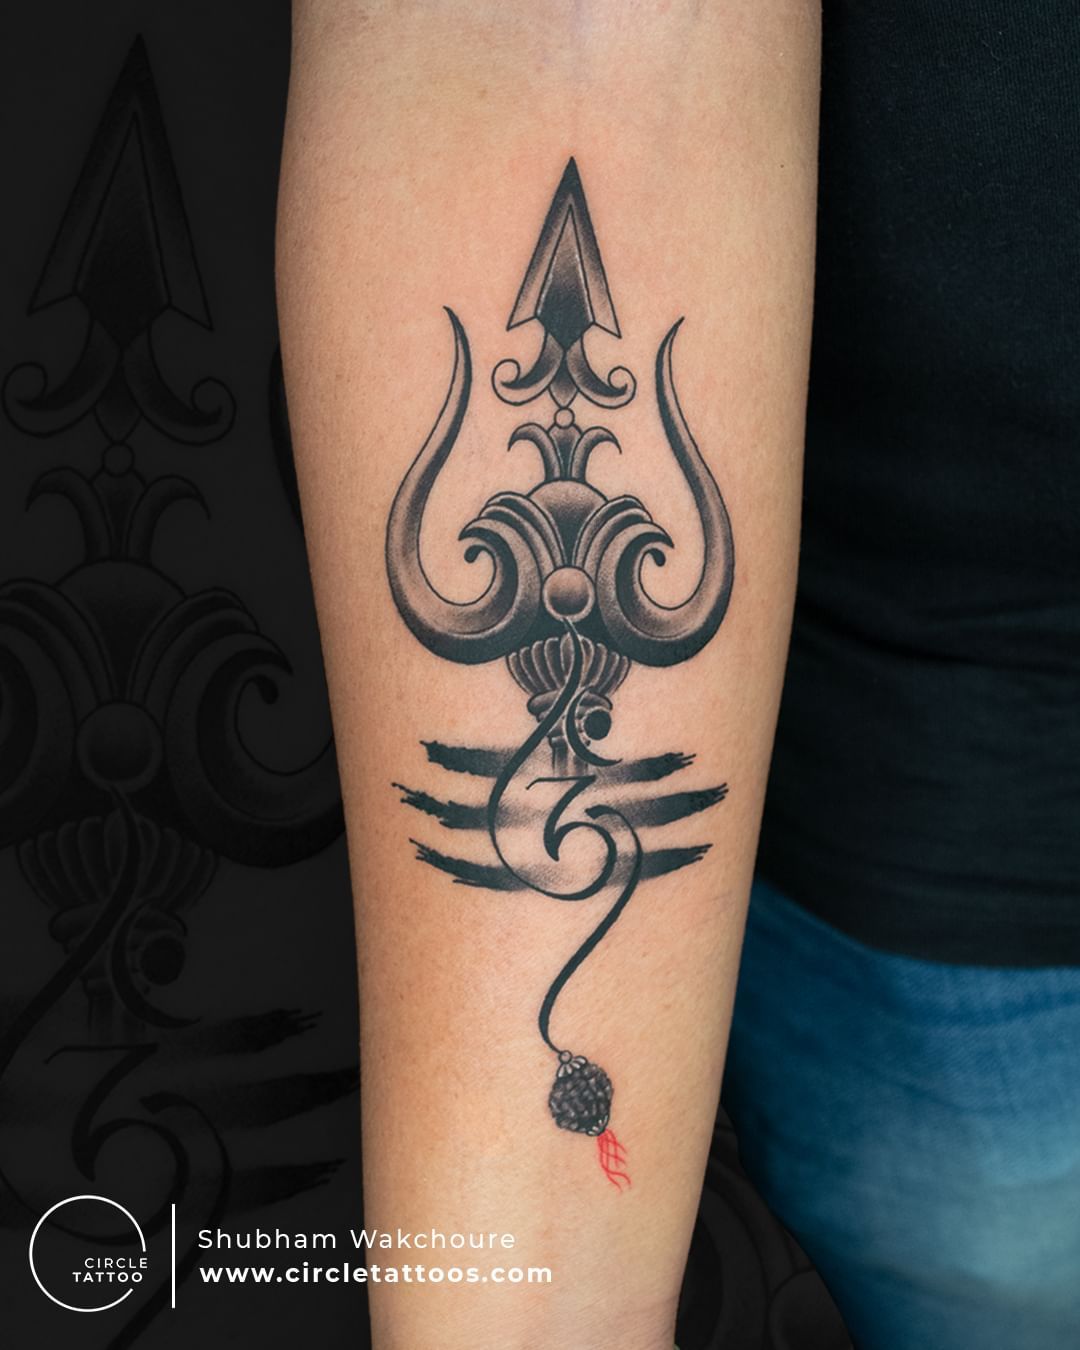 Details more than 63 trishul tattoo designs on hand super hot ...